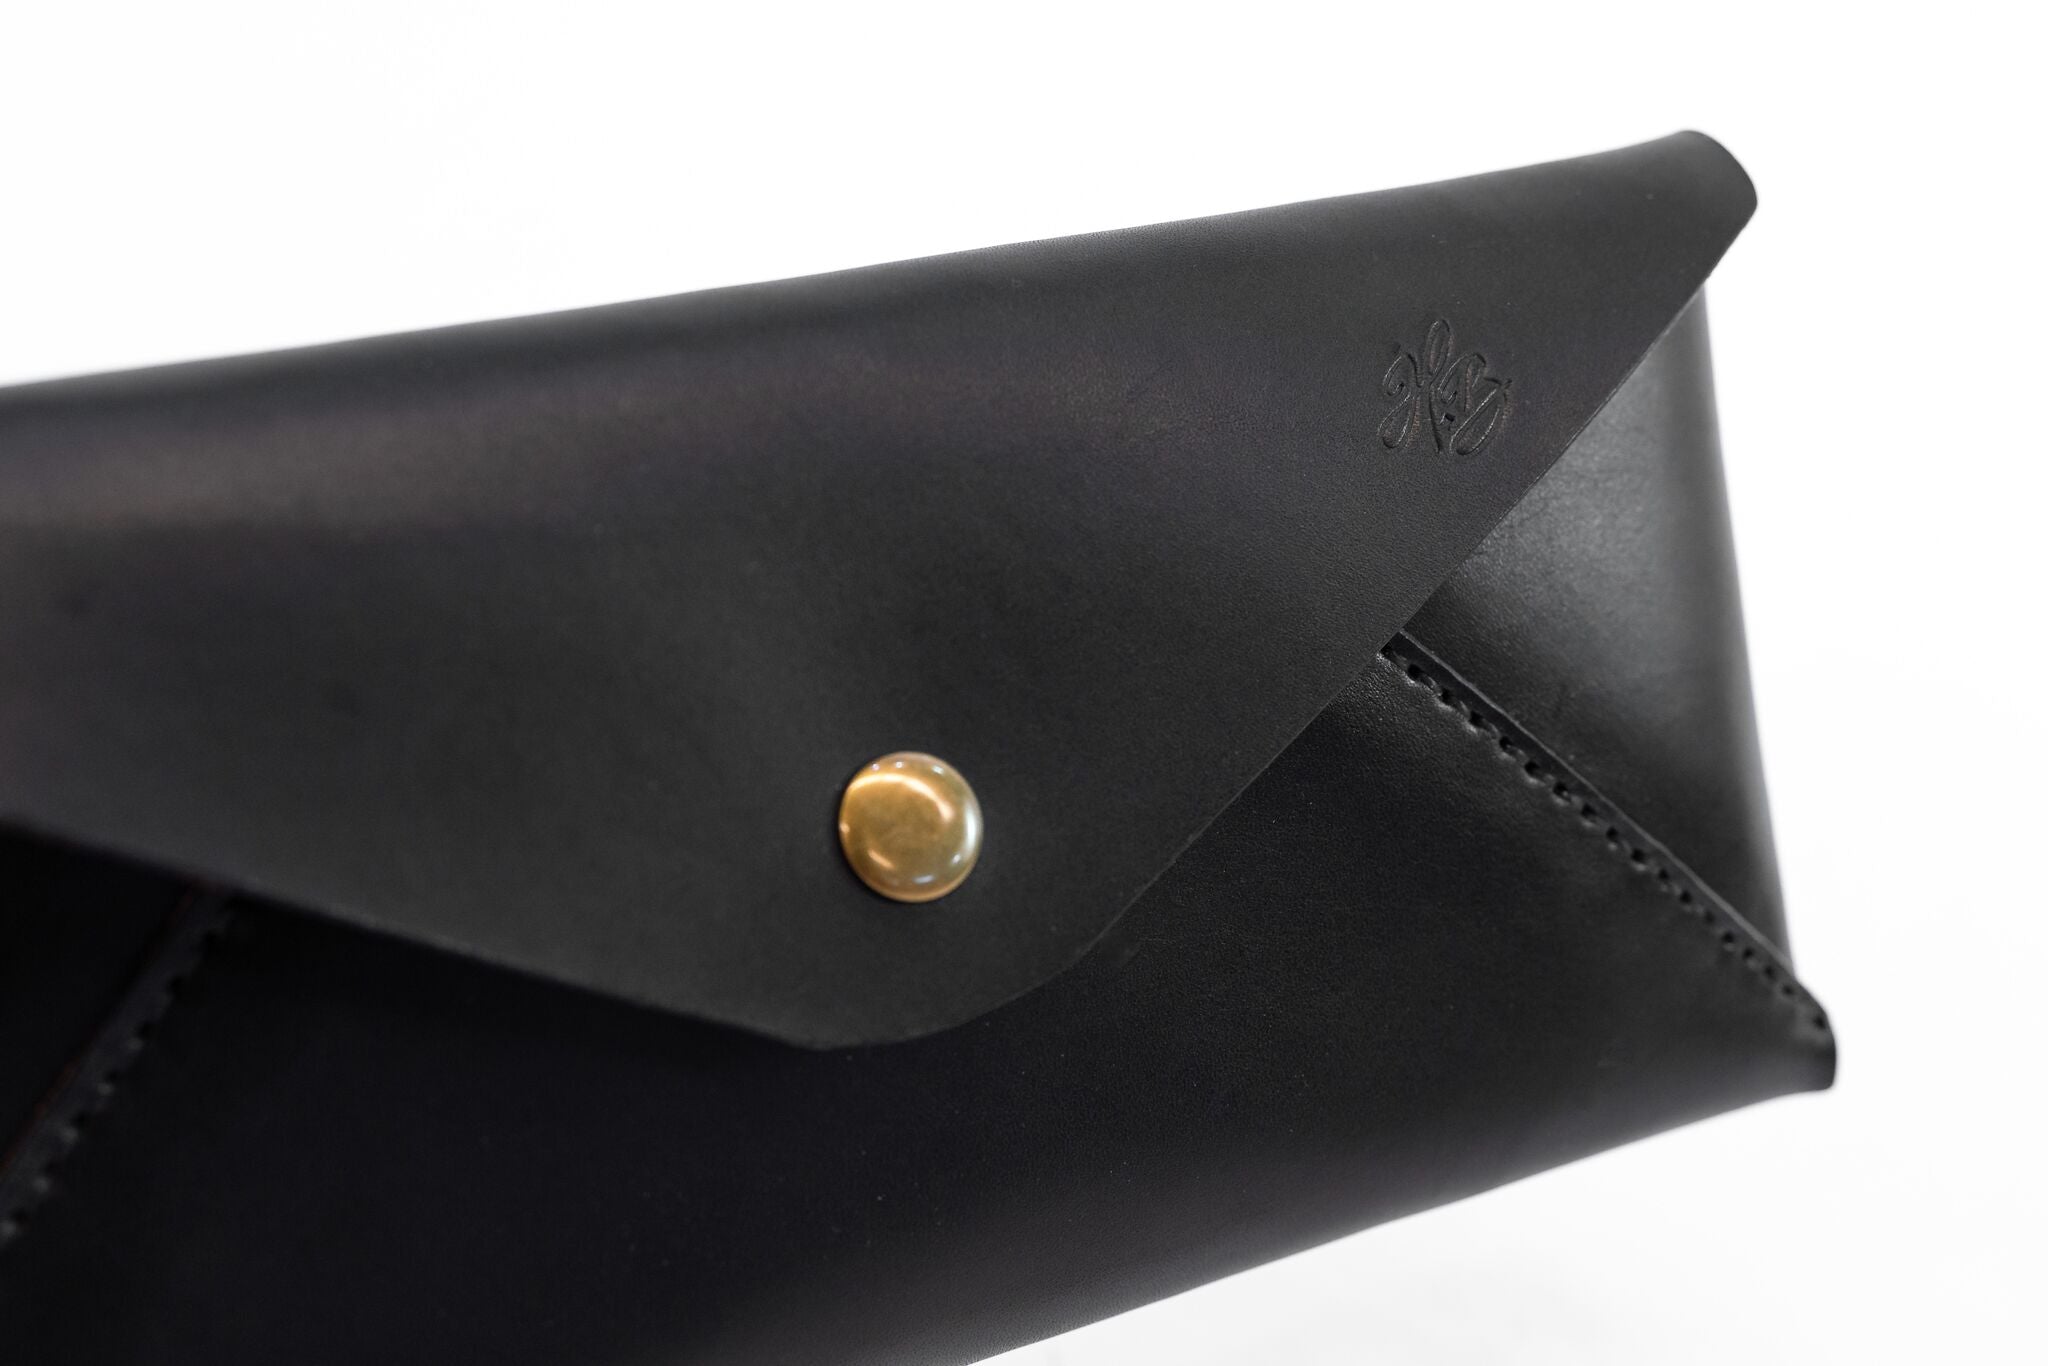 Violet Ray black envelope clutch purse embroidered with chain strap | eBay